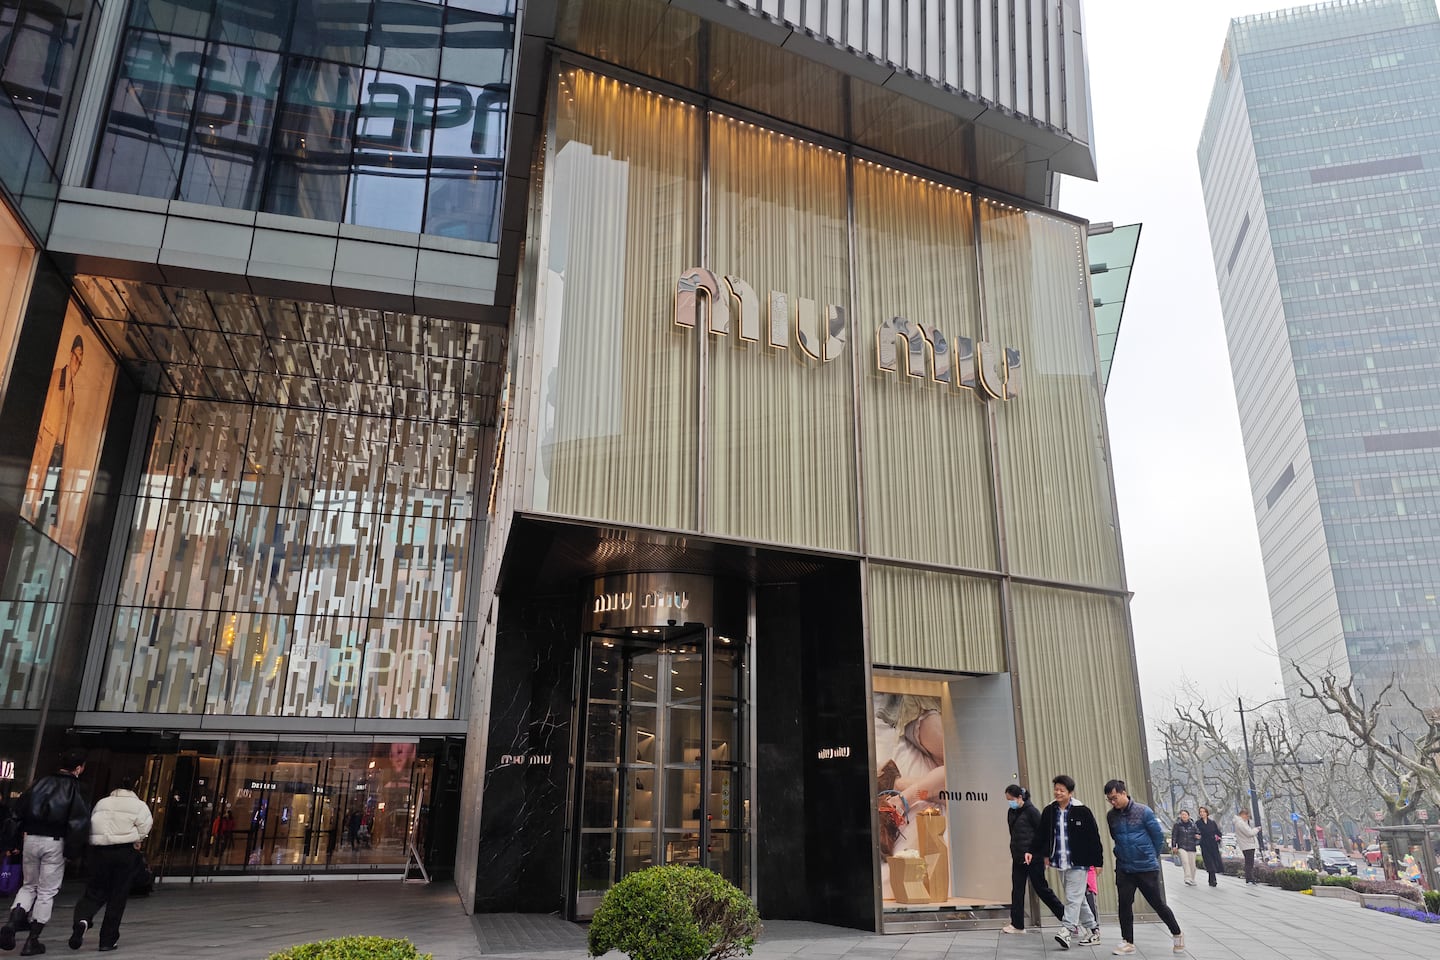 Miu Miu has recently found success in China despite a general slowdown in luxury sales in the country.